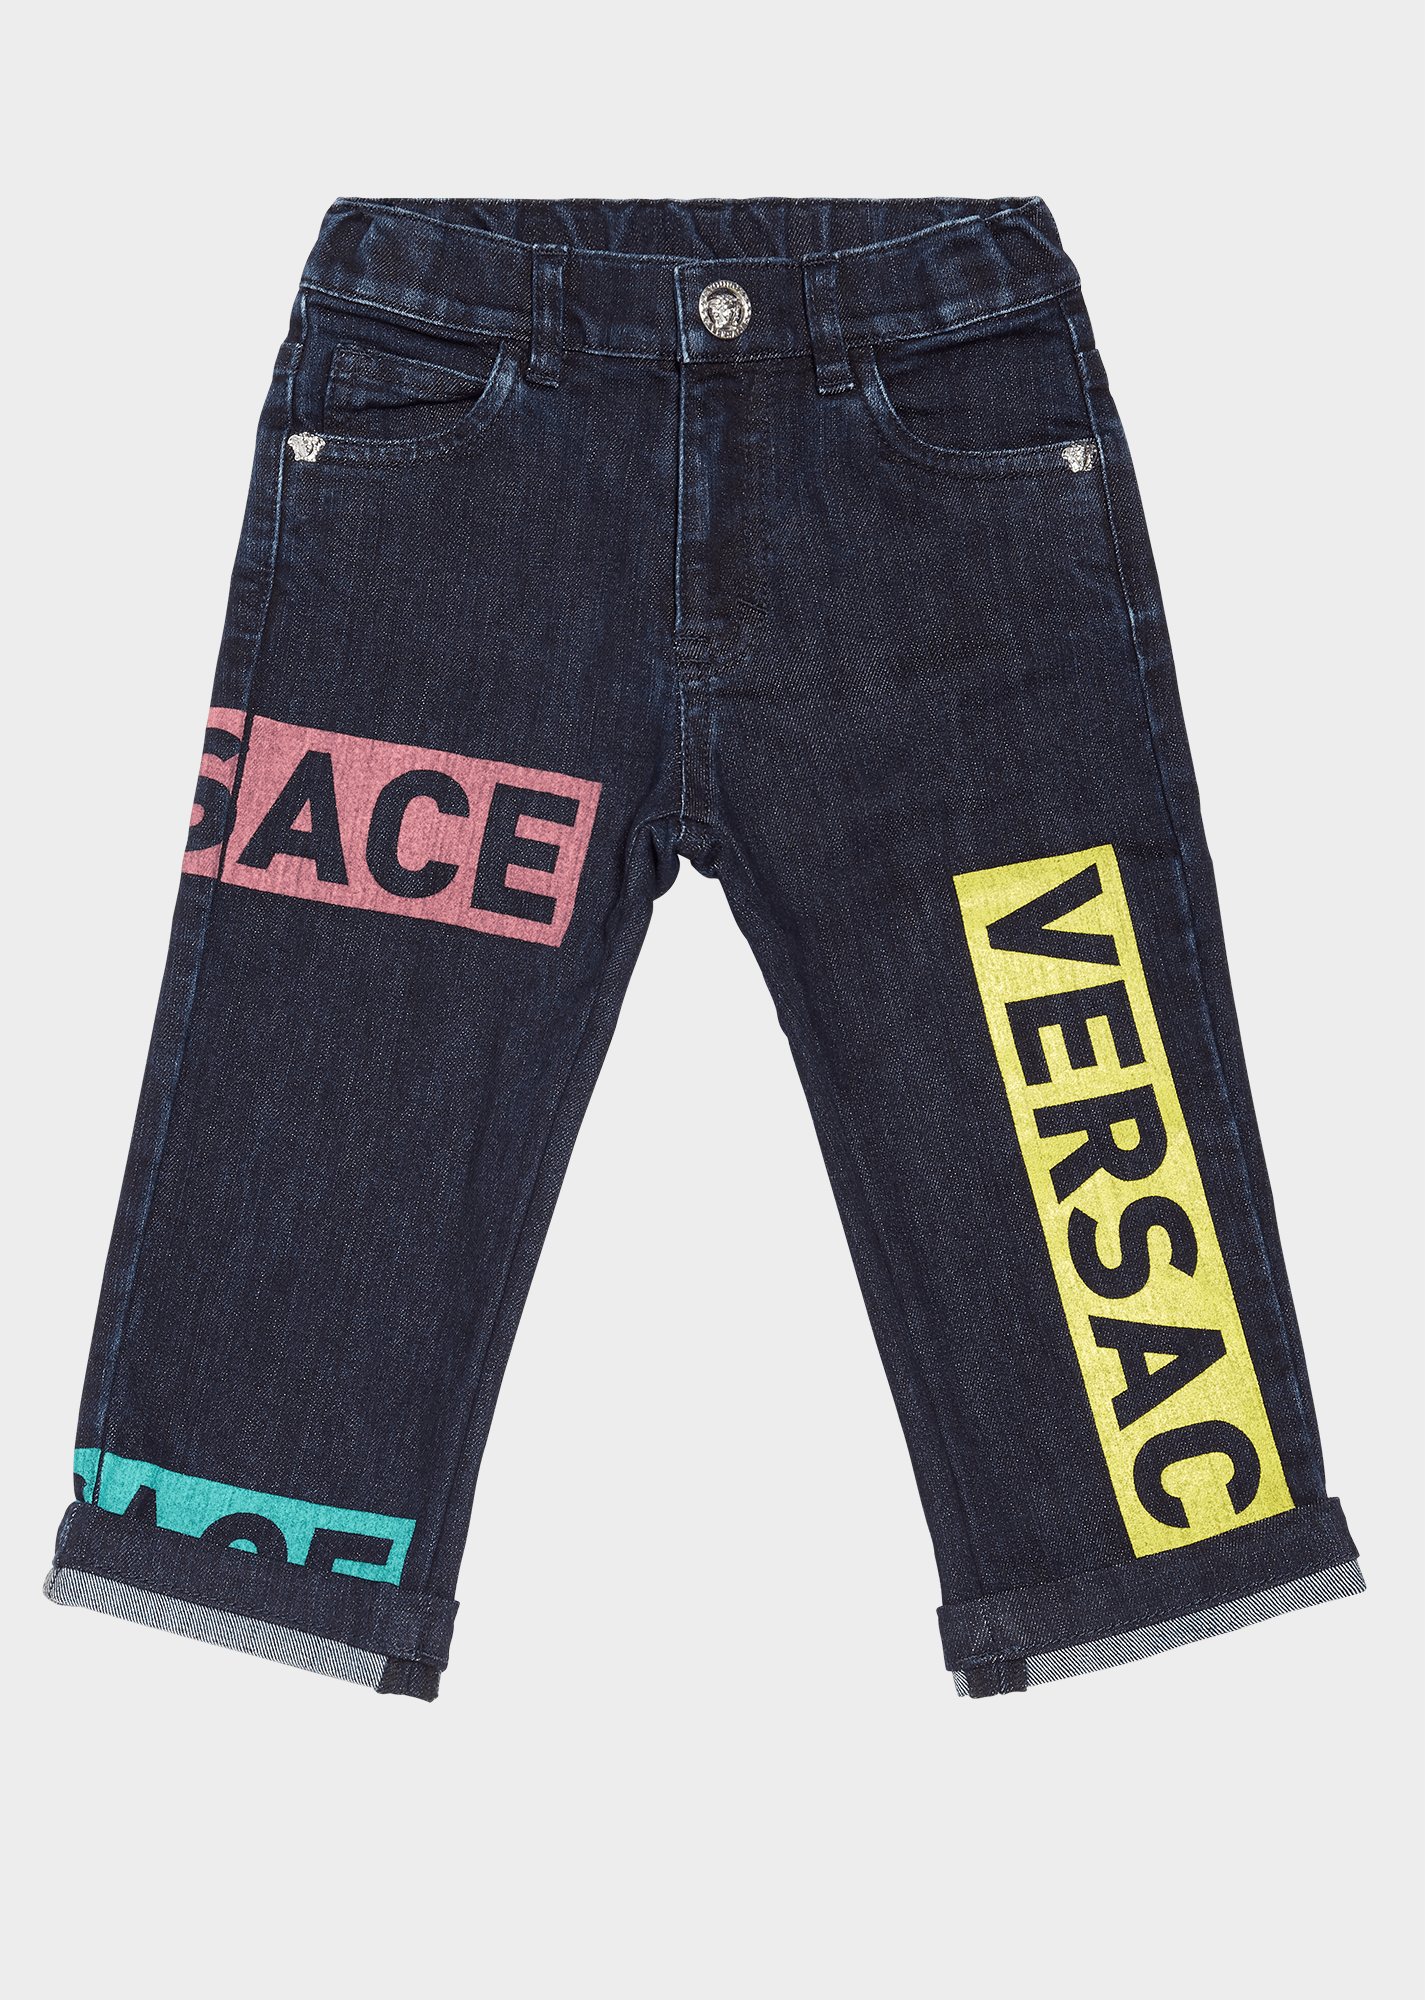 Colorful Clothing Logo - Young Versace Colorful Logo Patches Jeans for Boys | Official Website